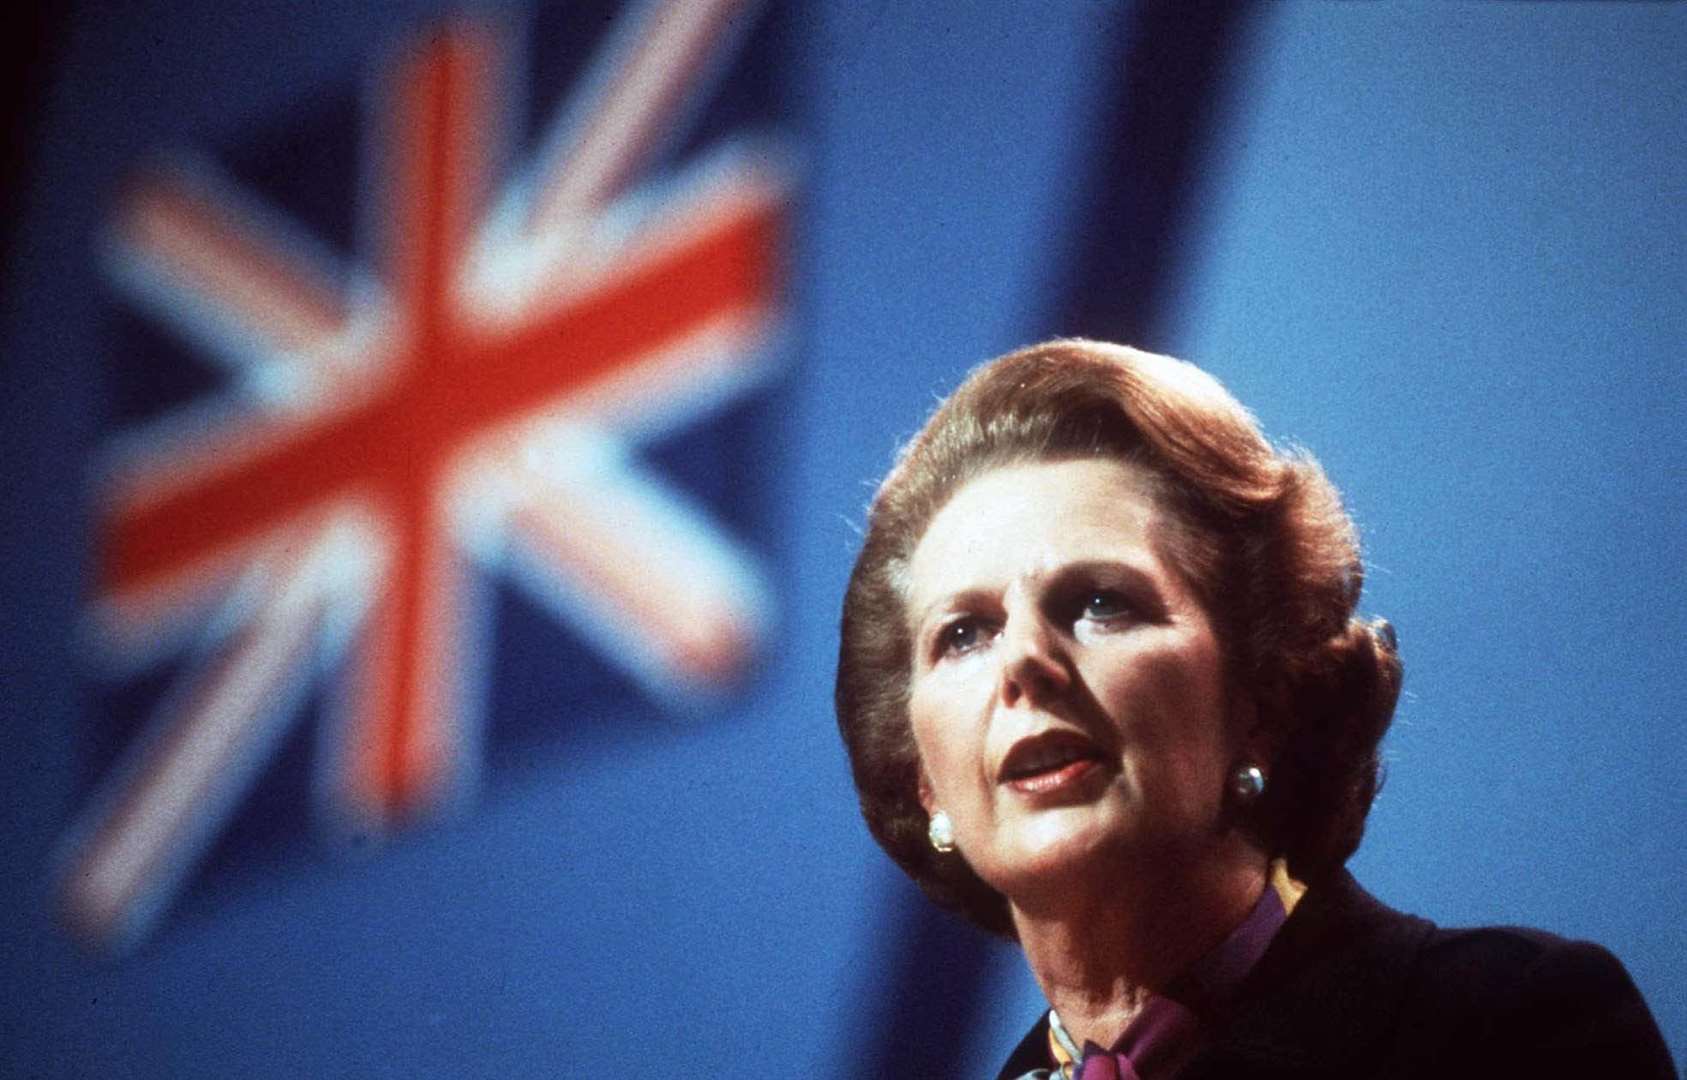 One Kent MP has said Margaret Thatcher, who helped created Channel 4, wouldn't have made the mistake the government is now making